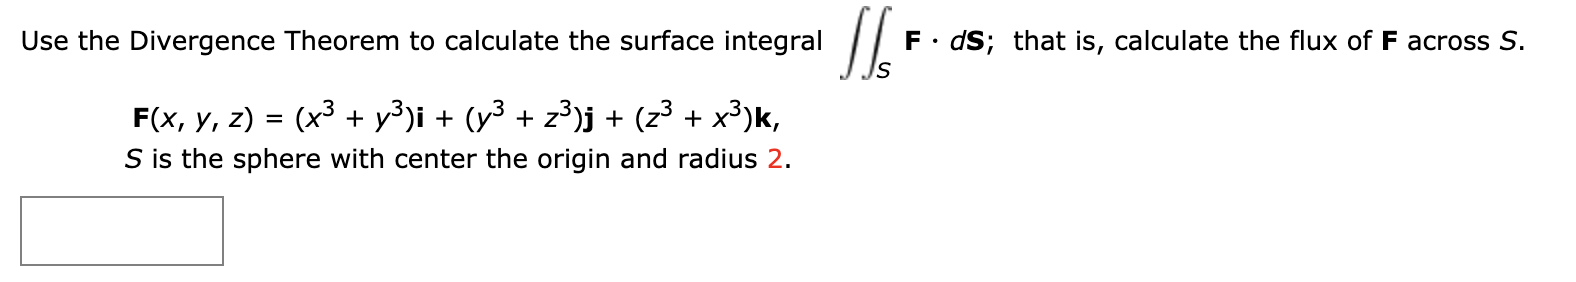 F dS; that is, calculate the flux of F across S.
Use the Divergence Theorem to calculate the surface integral
(x3 y3)i (y3 z3)j + (z3 + x3)k,
F(x, у, 2)
=
S is the sphere with center the origin and radius 2.
